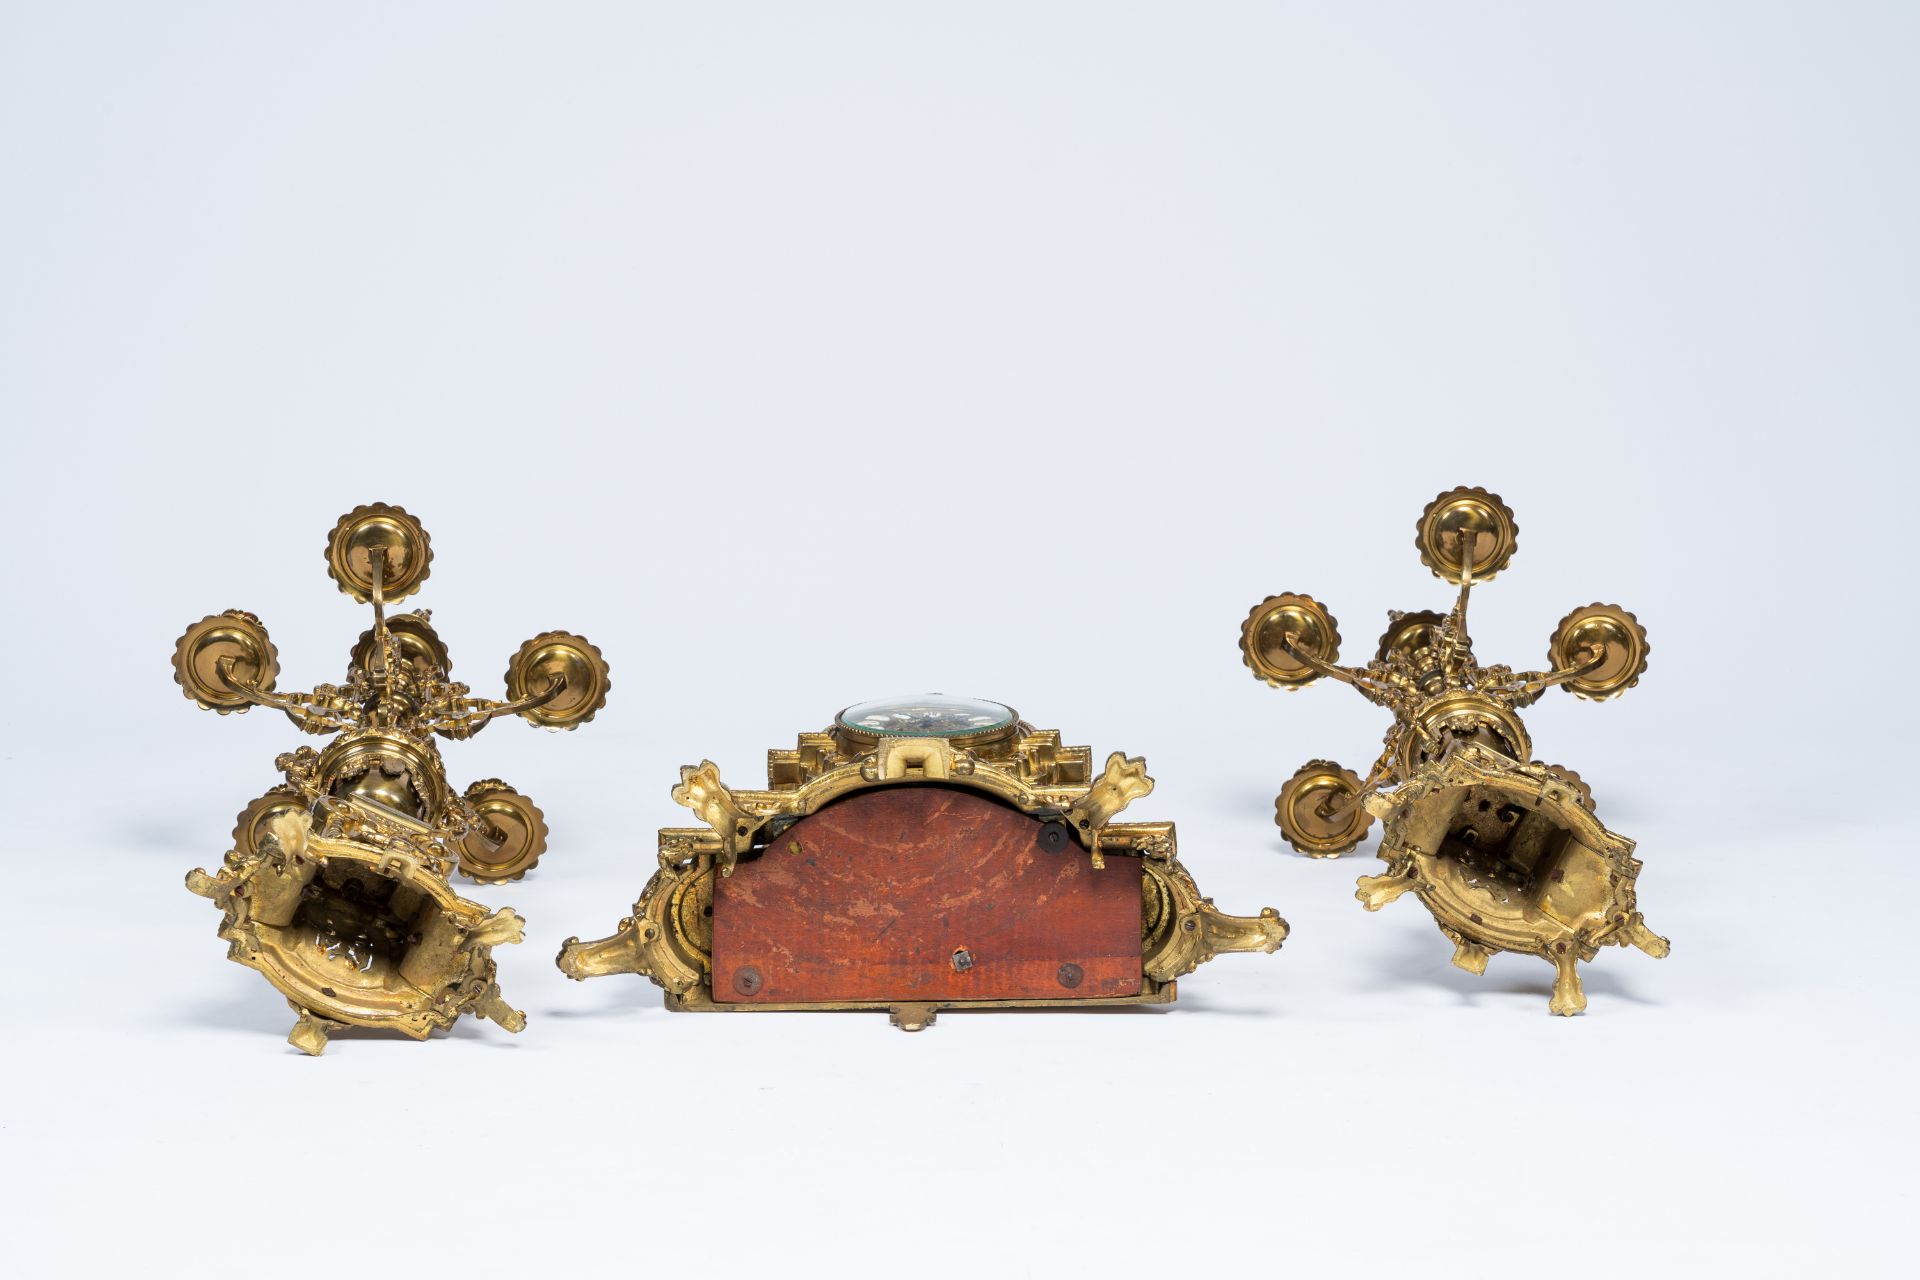 A large Belgian-French Baroque revival gilt brass three-piece clock garniture, late 19th C. - Image 6 of 8